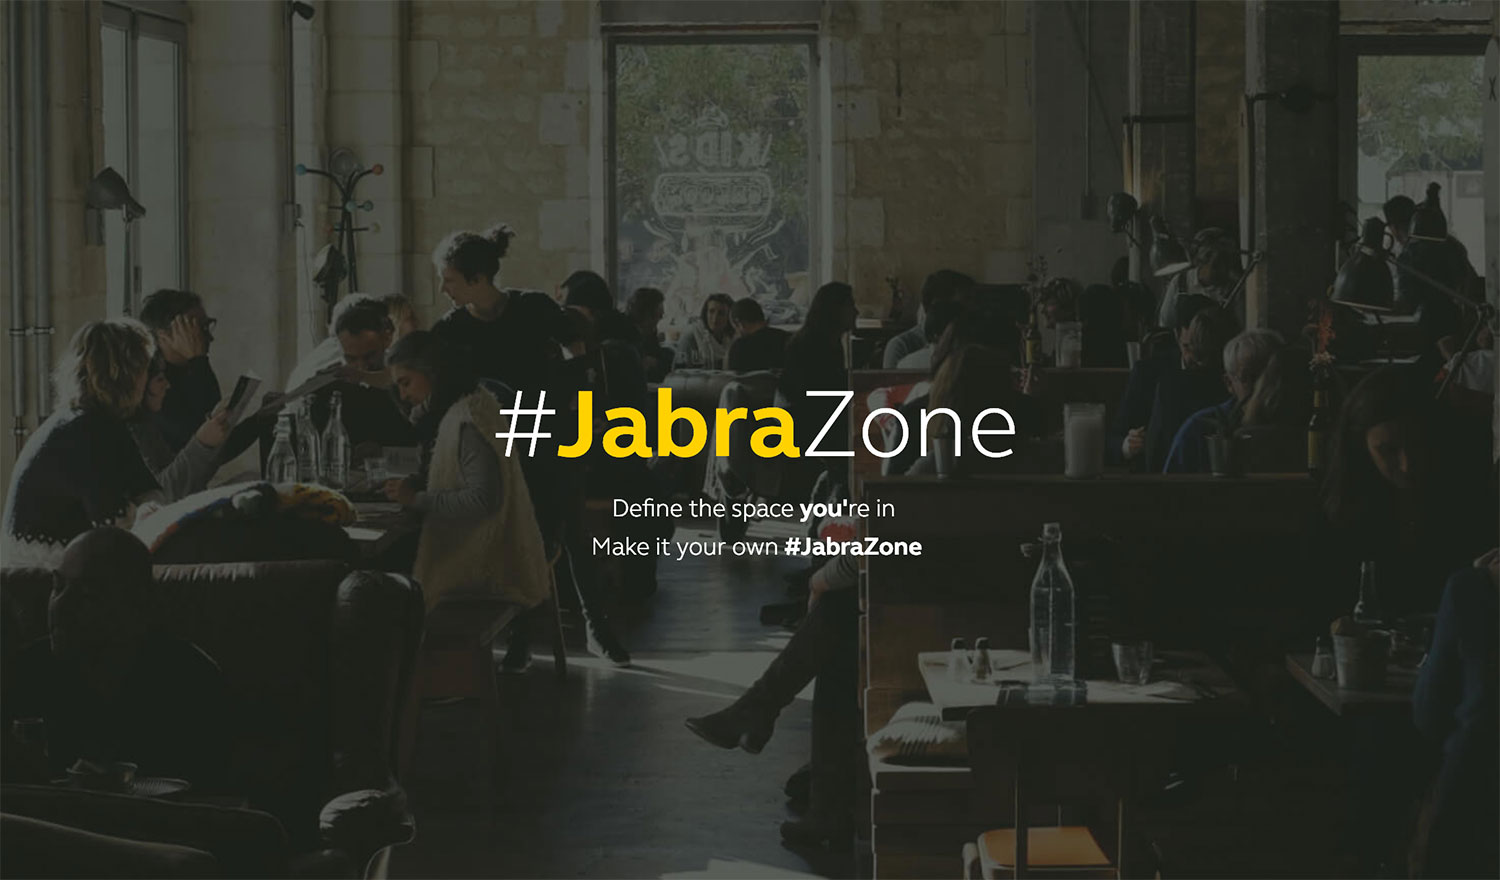 Win a trip for 2 to Japan with JabraZone